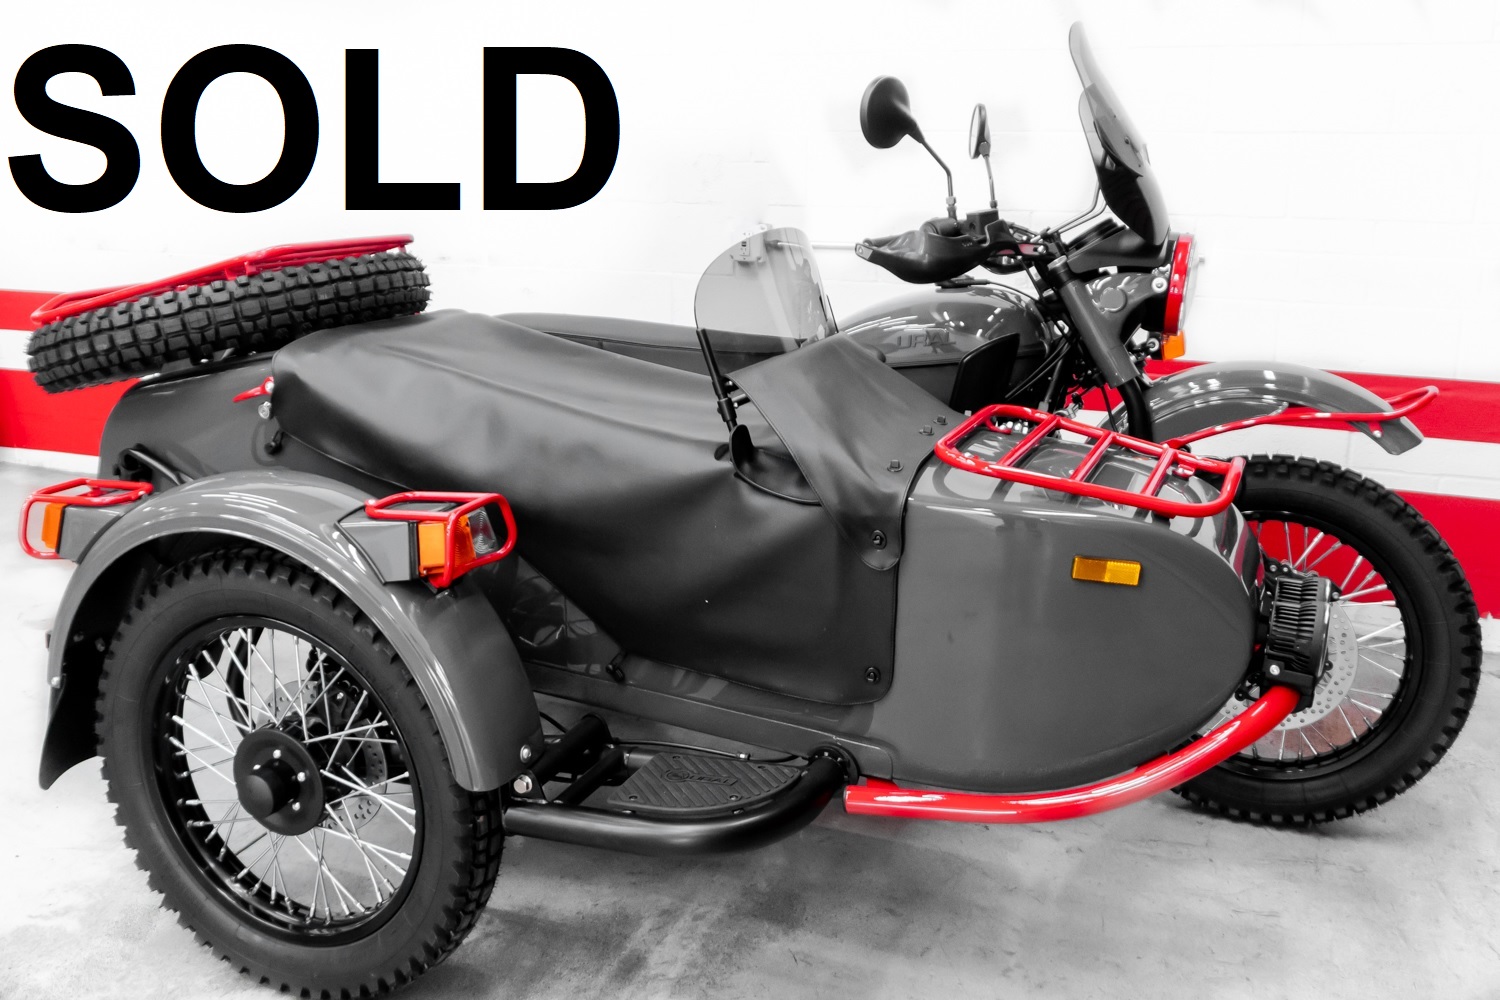 2023 Ural Gear Up (2WD) - NEW 2023 MODEL